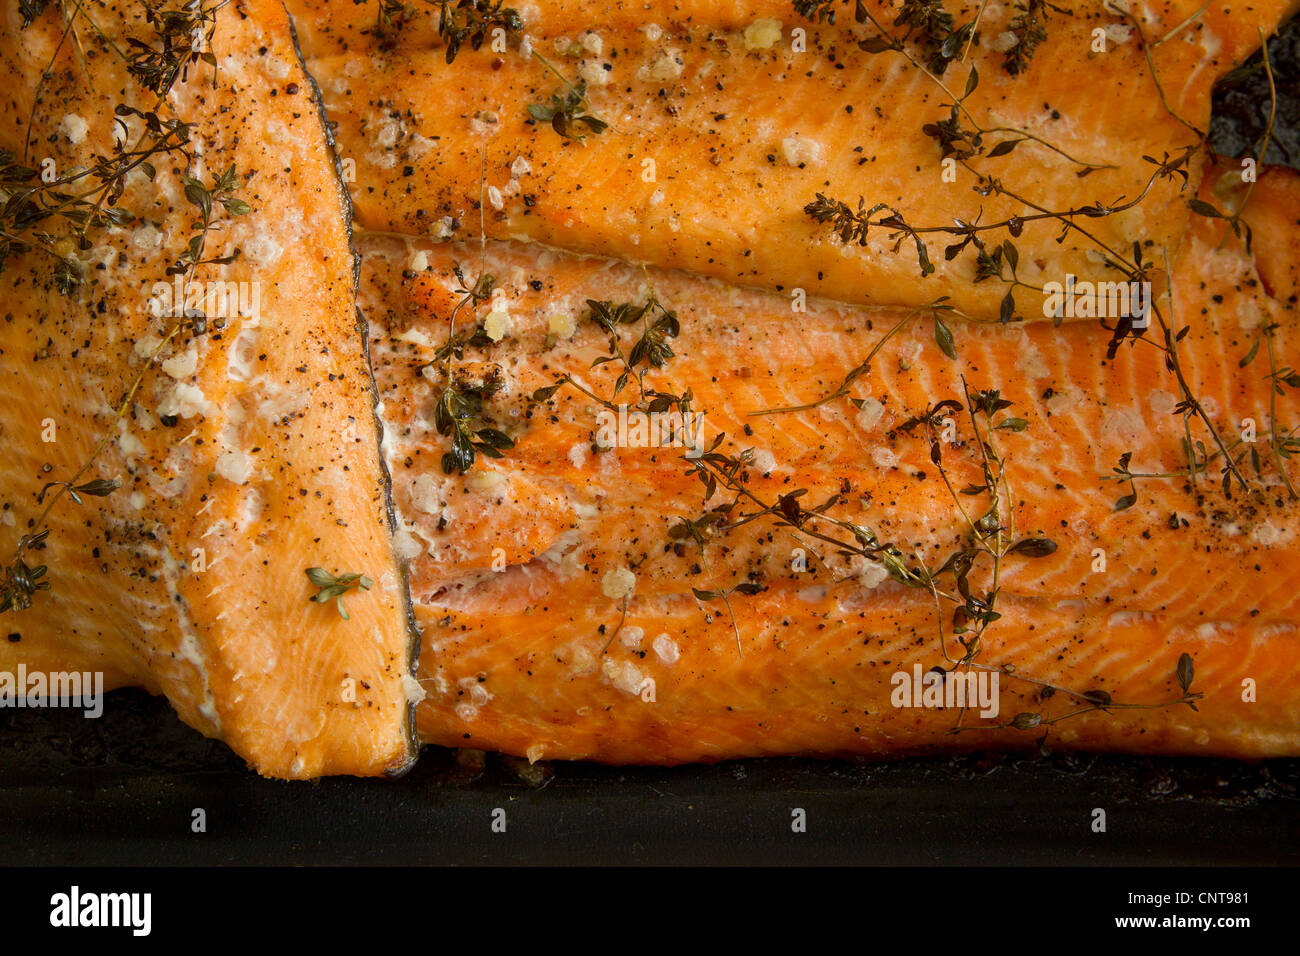 Baked trout, close-up Stock Photo